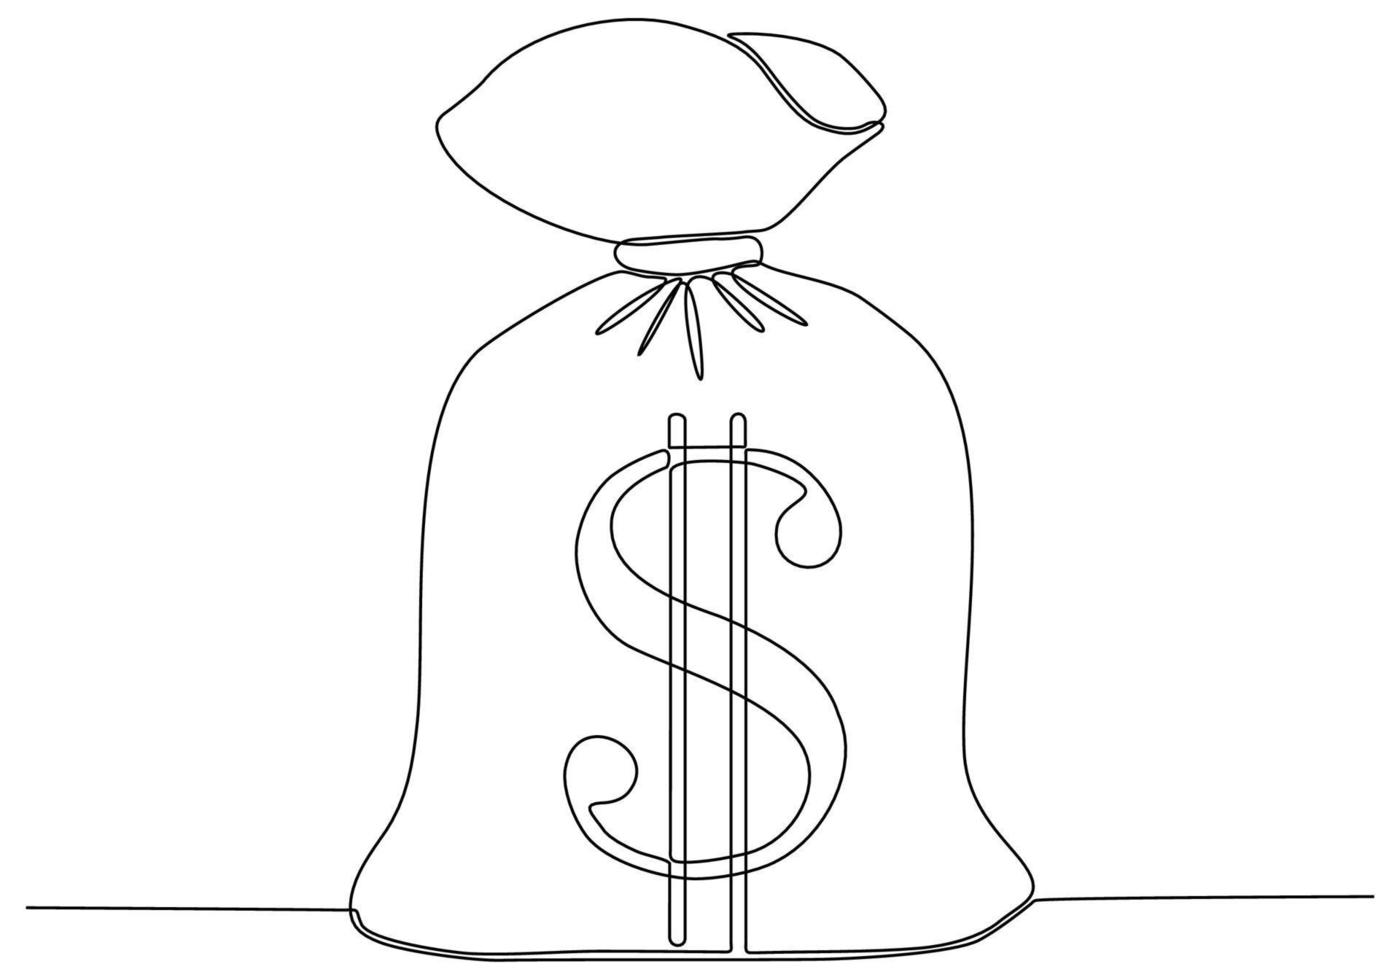 Continuous single line isolated vector object image, dollar sign